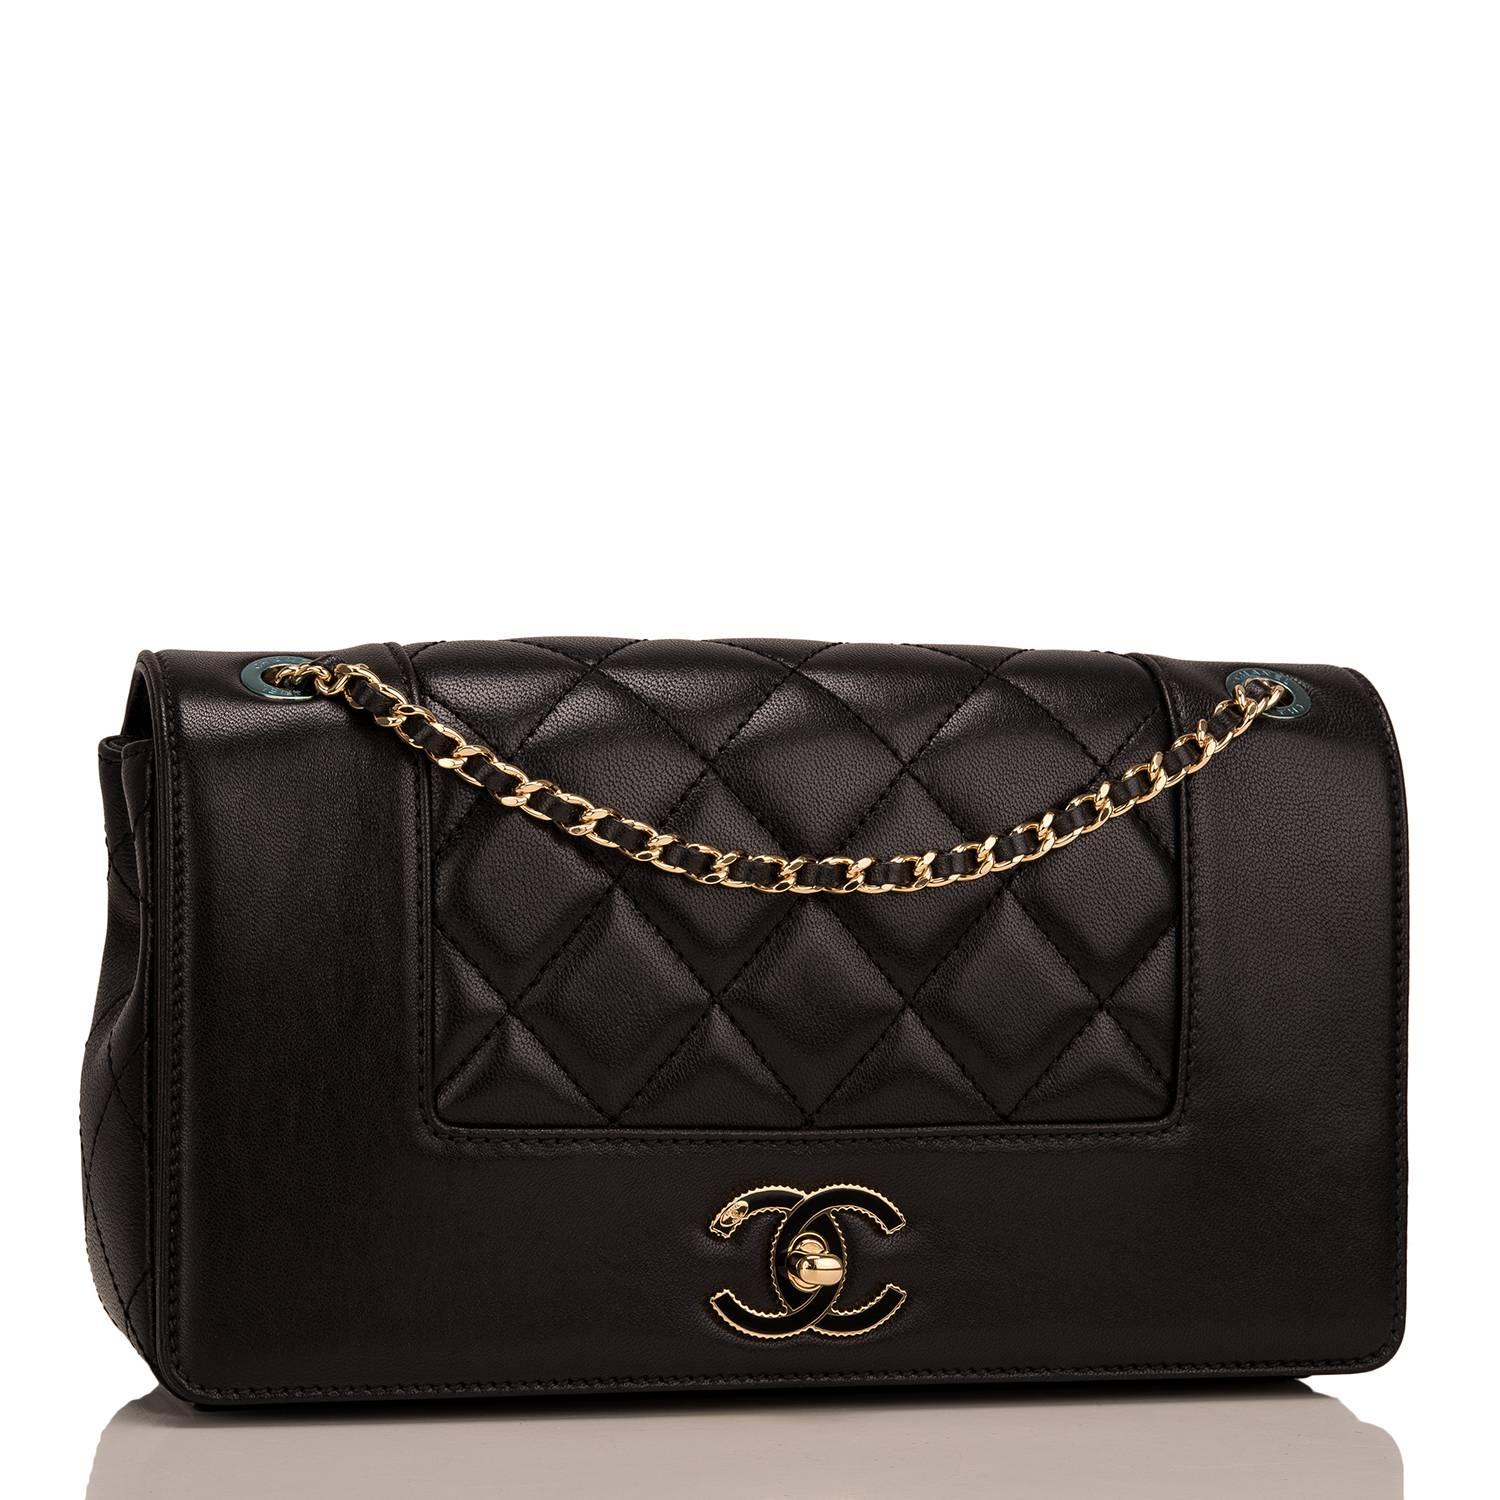 Chanel Paris In Rome Metiers d'Art Flap Bag of black sheepskin leather with gold tone hardware.

This limited edition bag features black quilting wth smooth leather time, a front flap with black enamel and gold tone turnlock closure, an interior